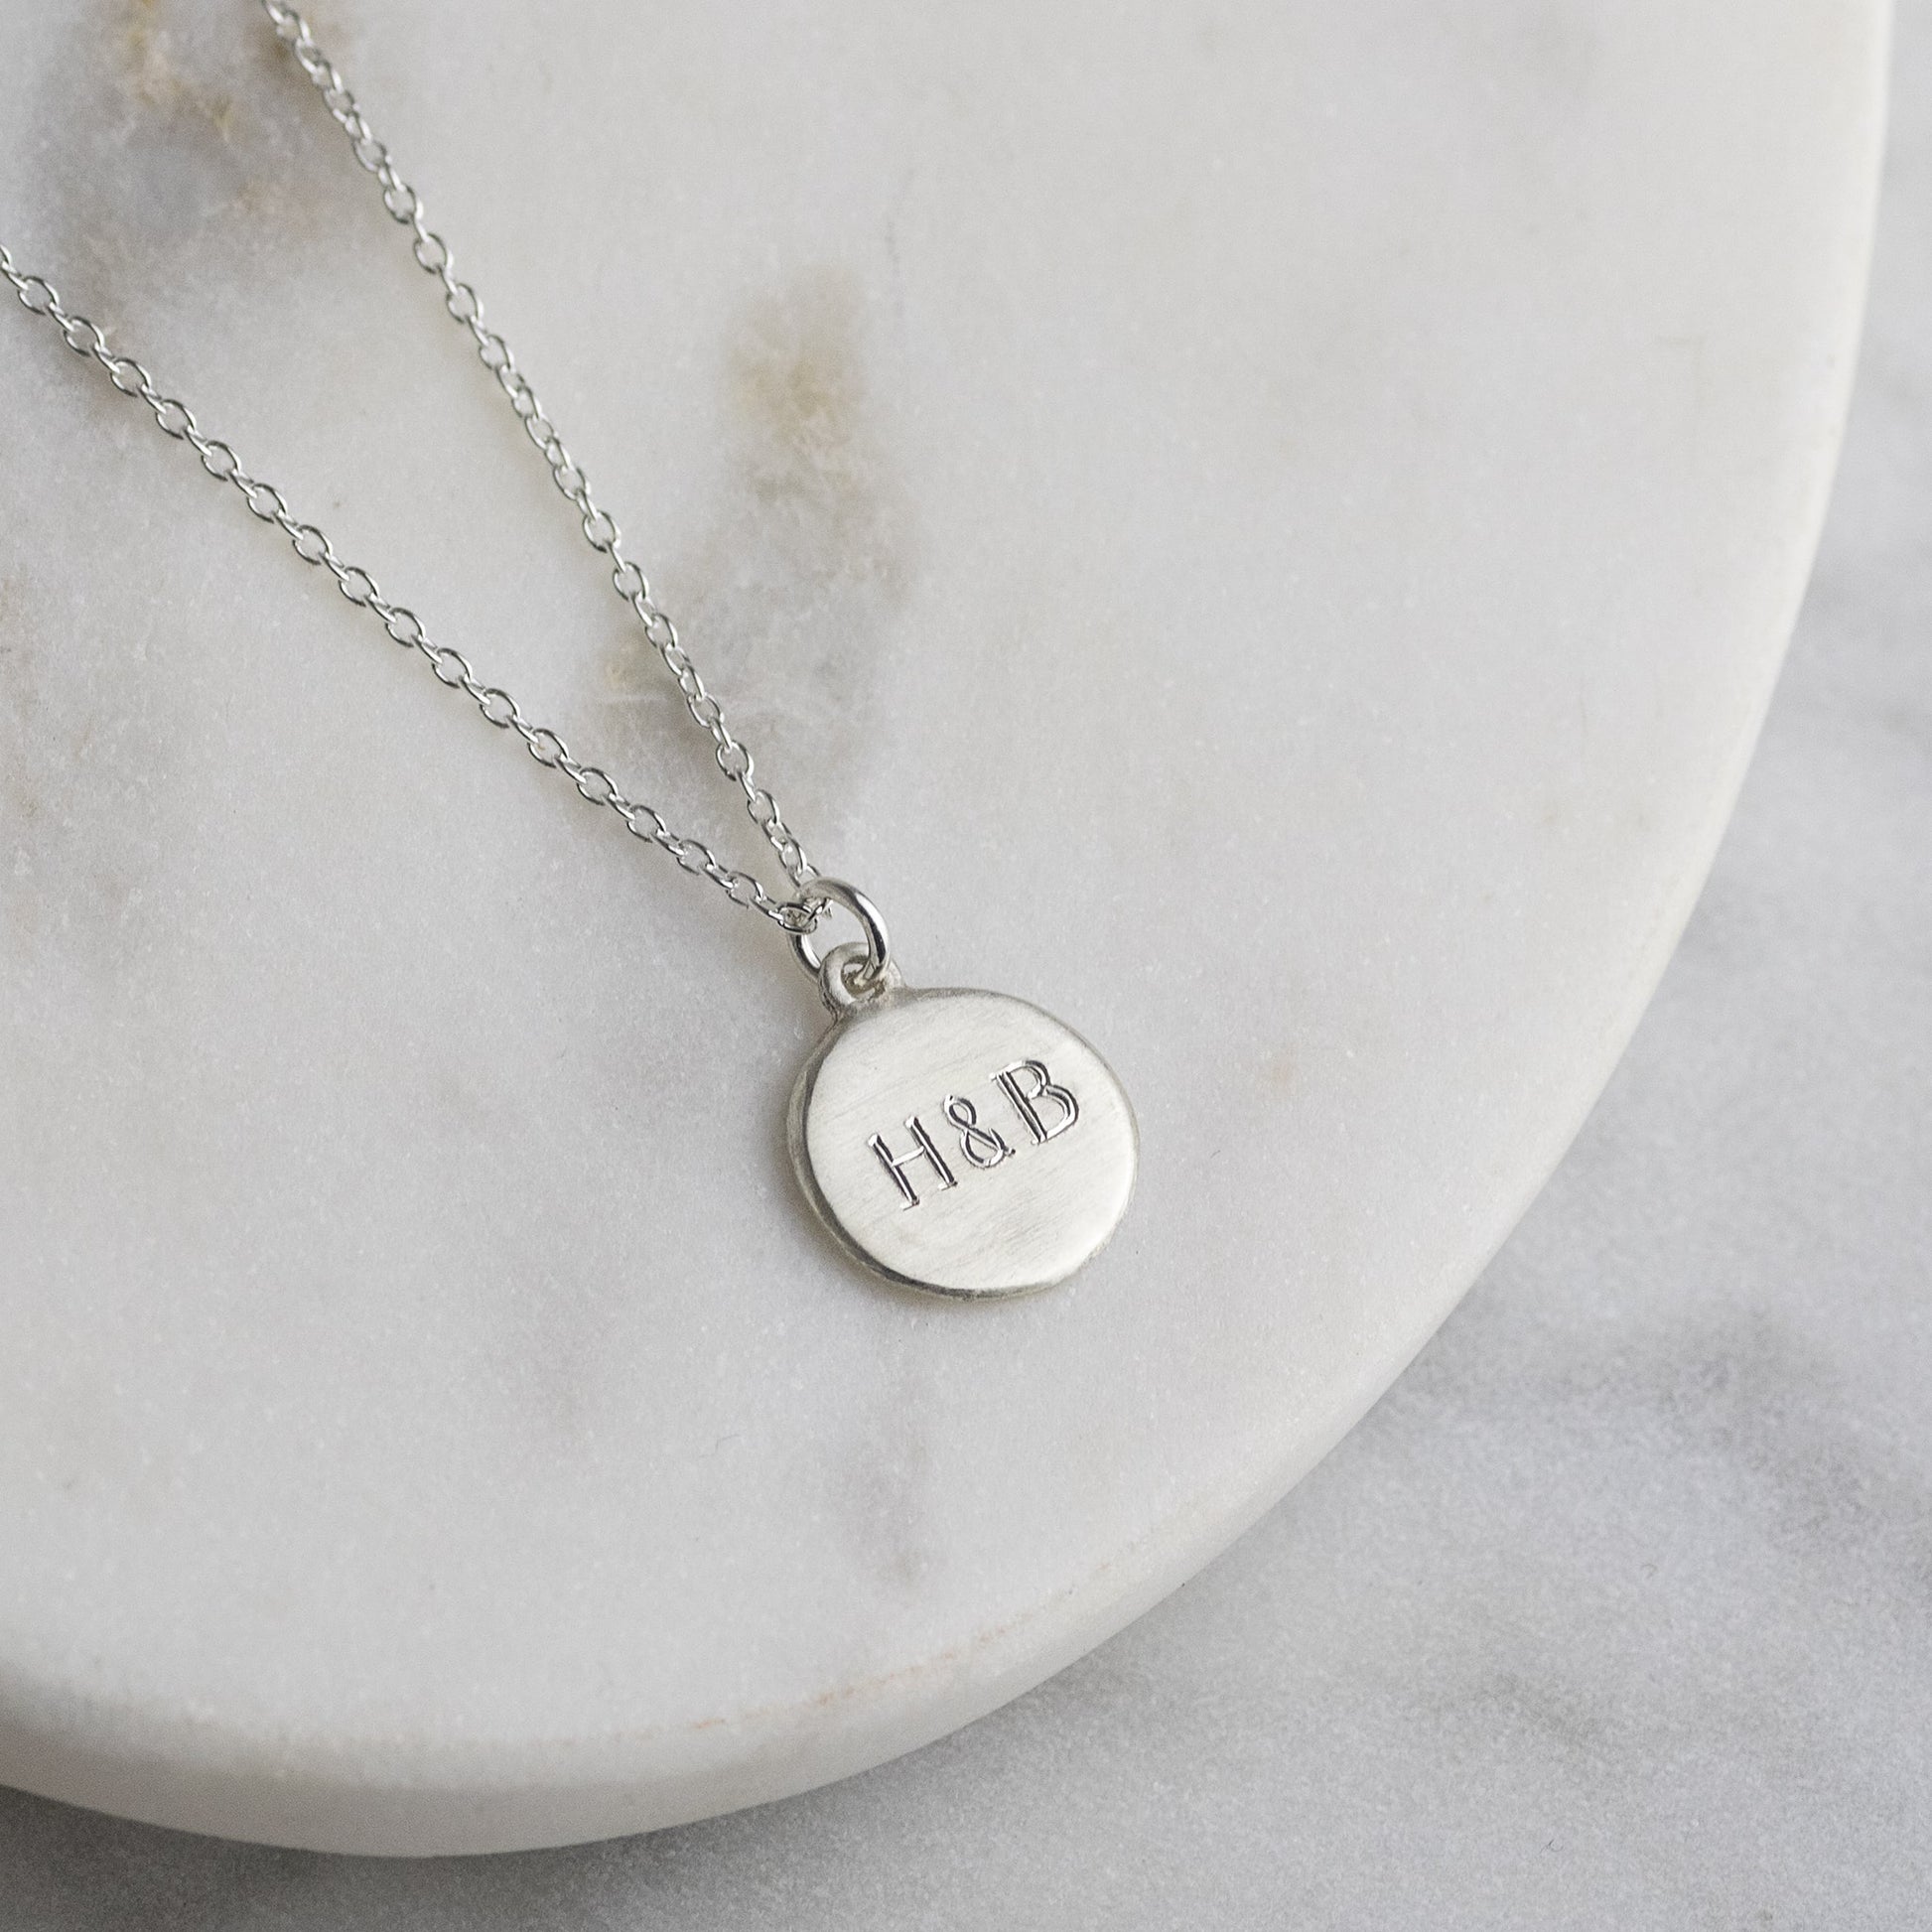 Personalised Engraved Silver Necklace for Valentine's Gift